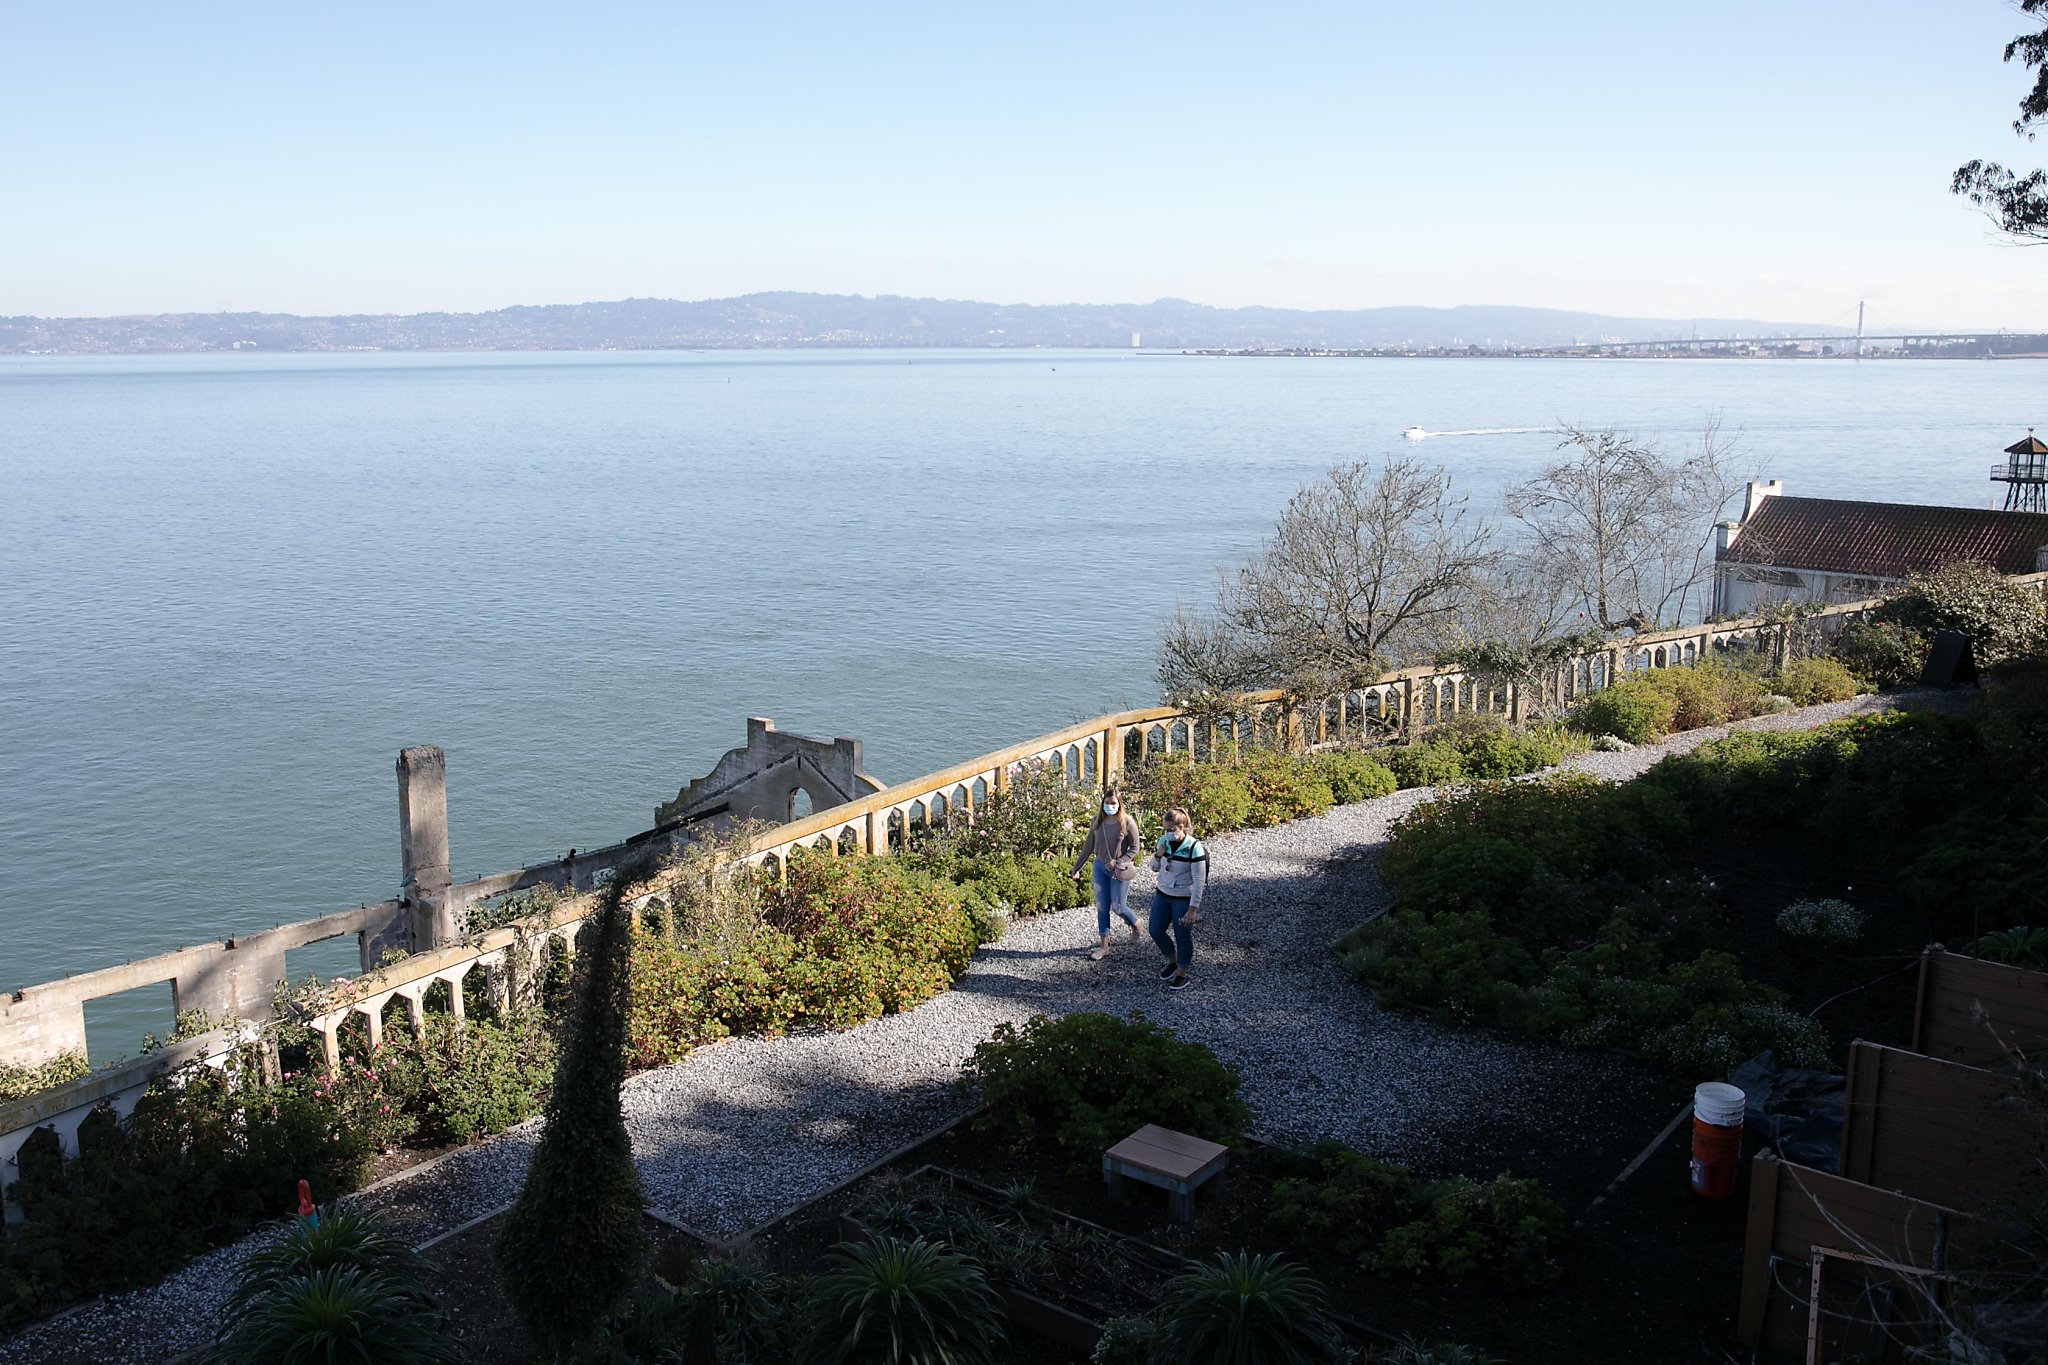 Rare Rose Rediscovered on Alcatraz 30 Years Ago Teaches Resilience Today